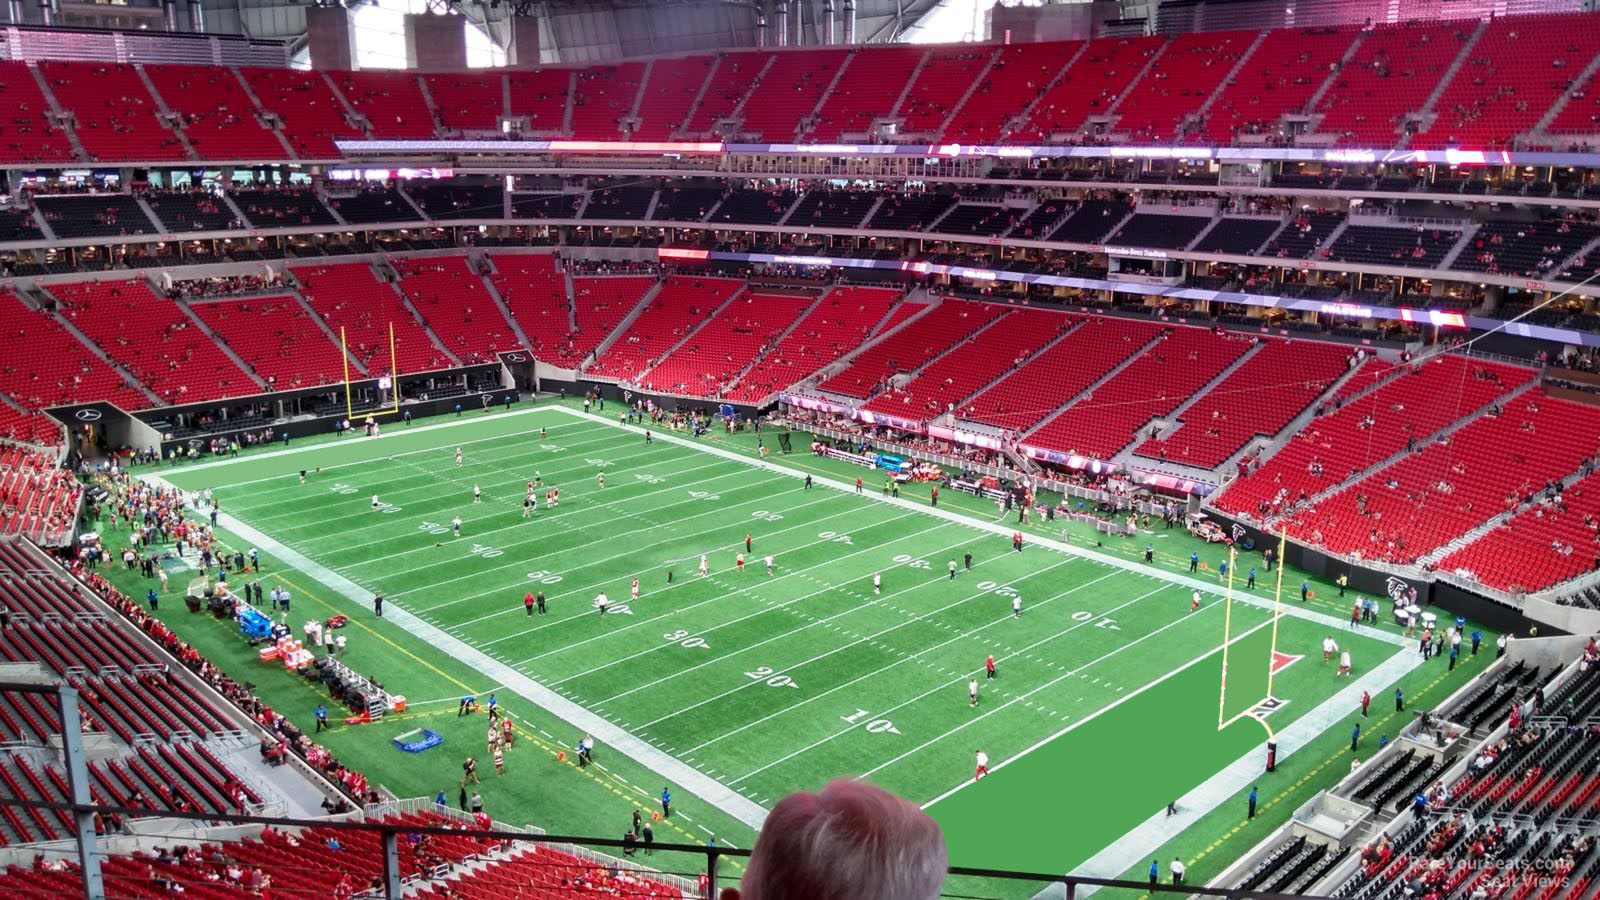 section 304, row 4 seat view  for football - mercedes-benz stadium